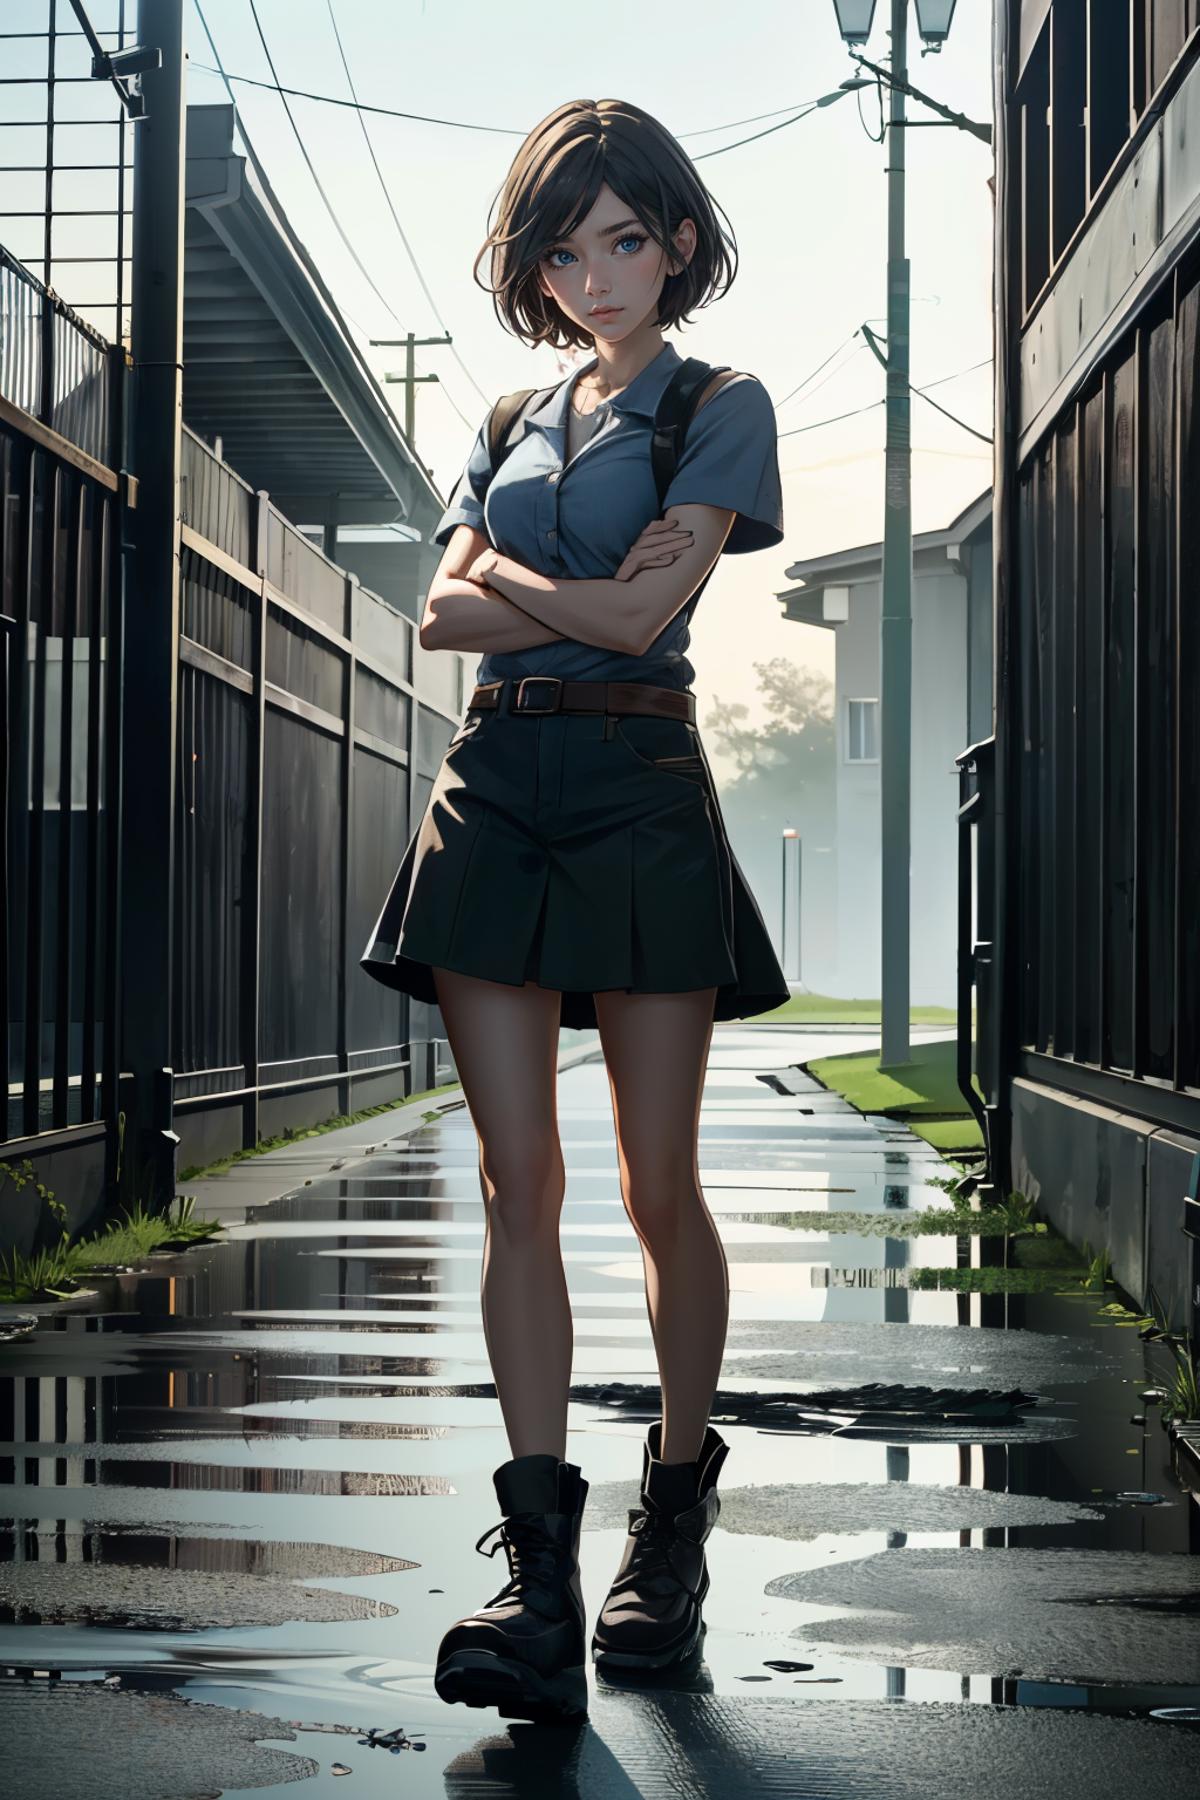 Jill Valentine from Resident Evil image by BloodRedKittie